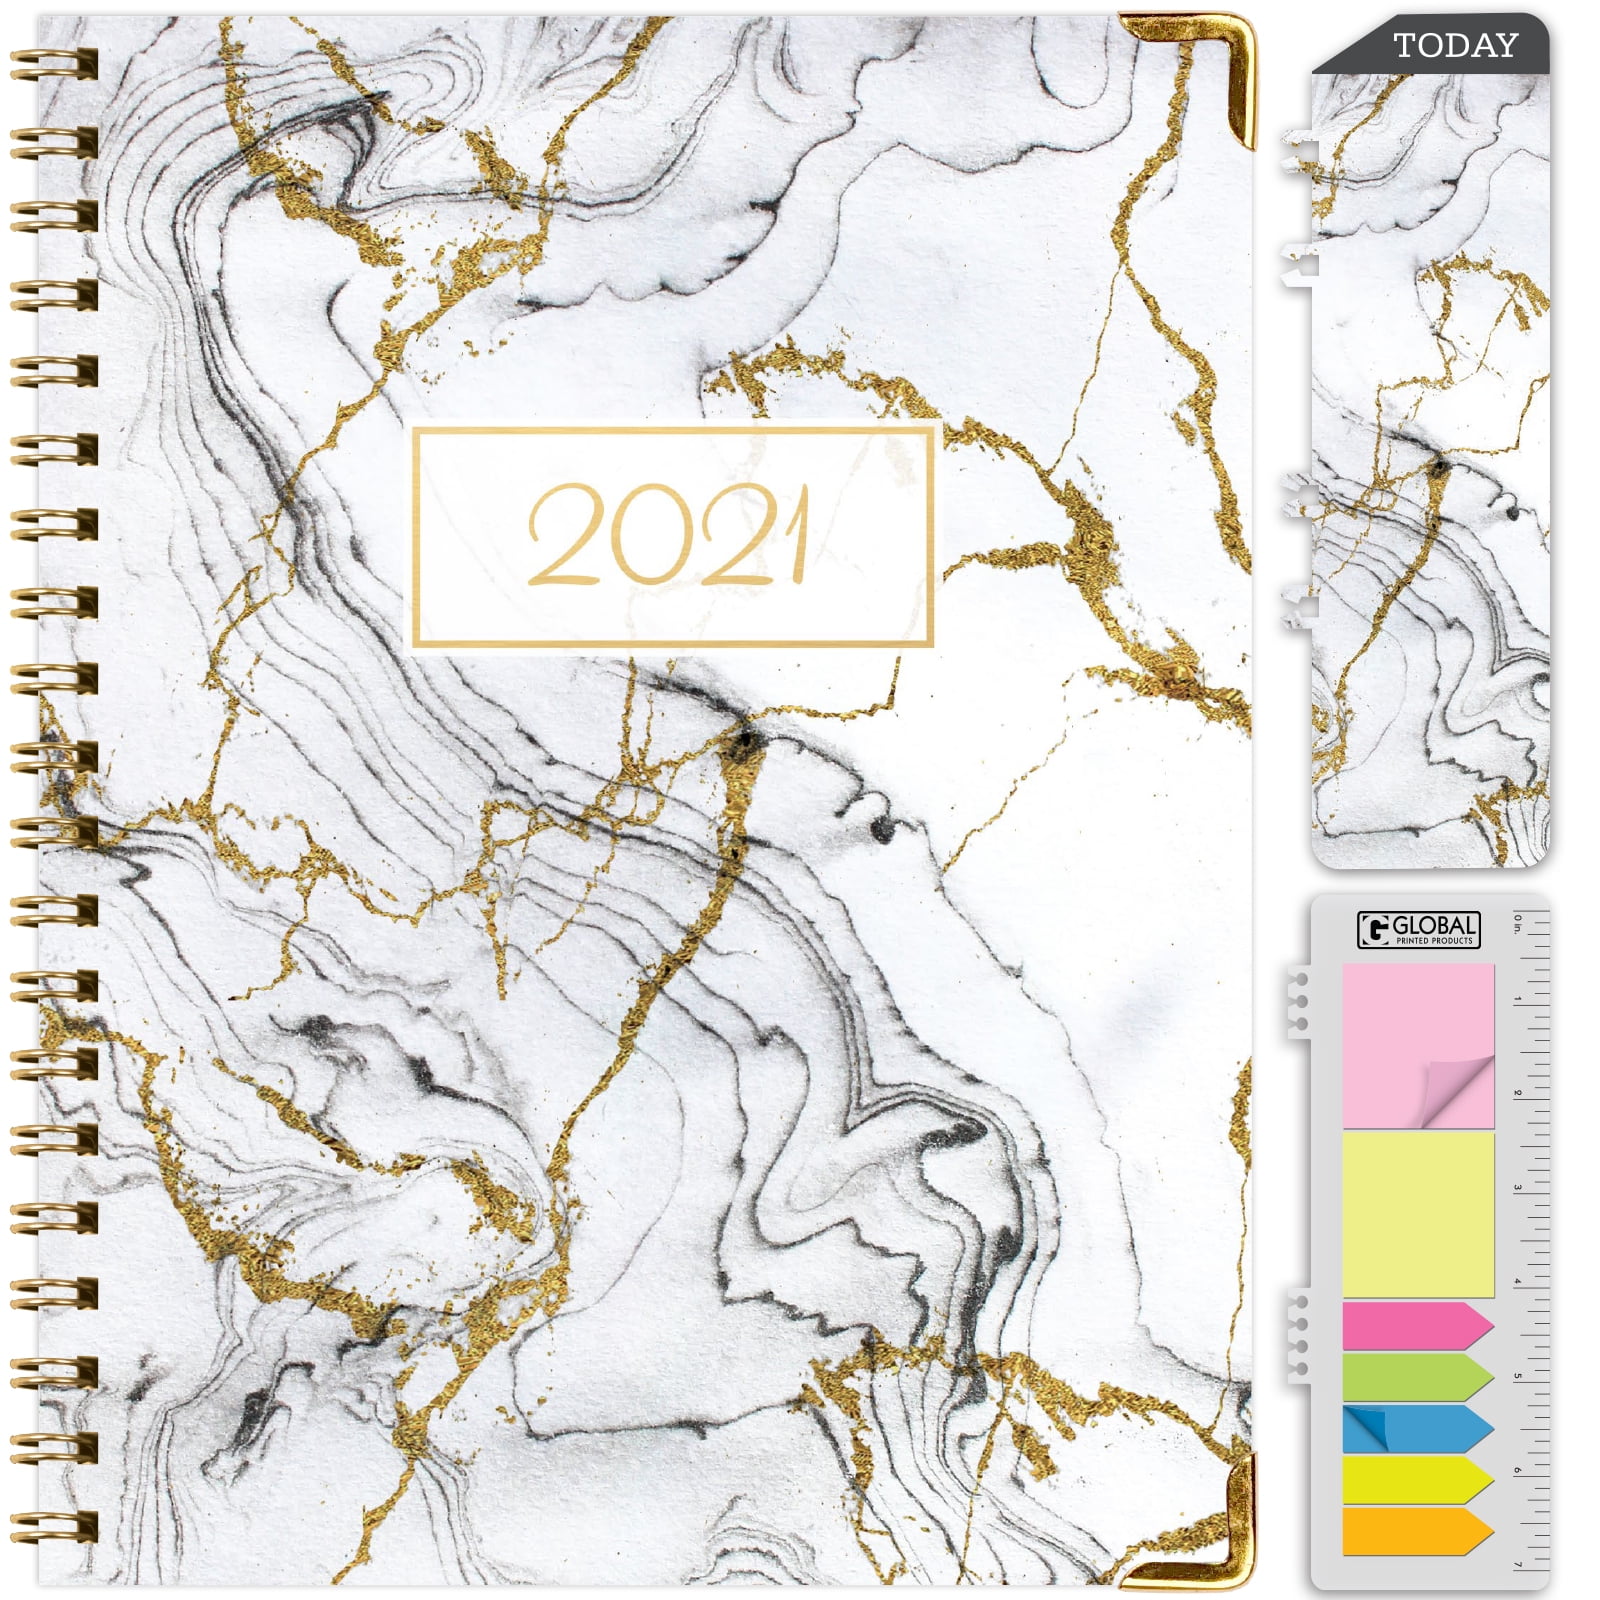 Nov 2020 - Dec 2021 HARDCOVER  2021 Planner Daily Weekly Monthly Planner